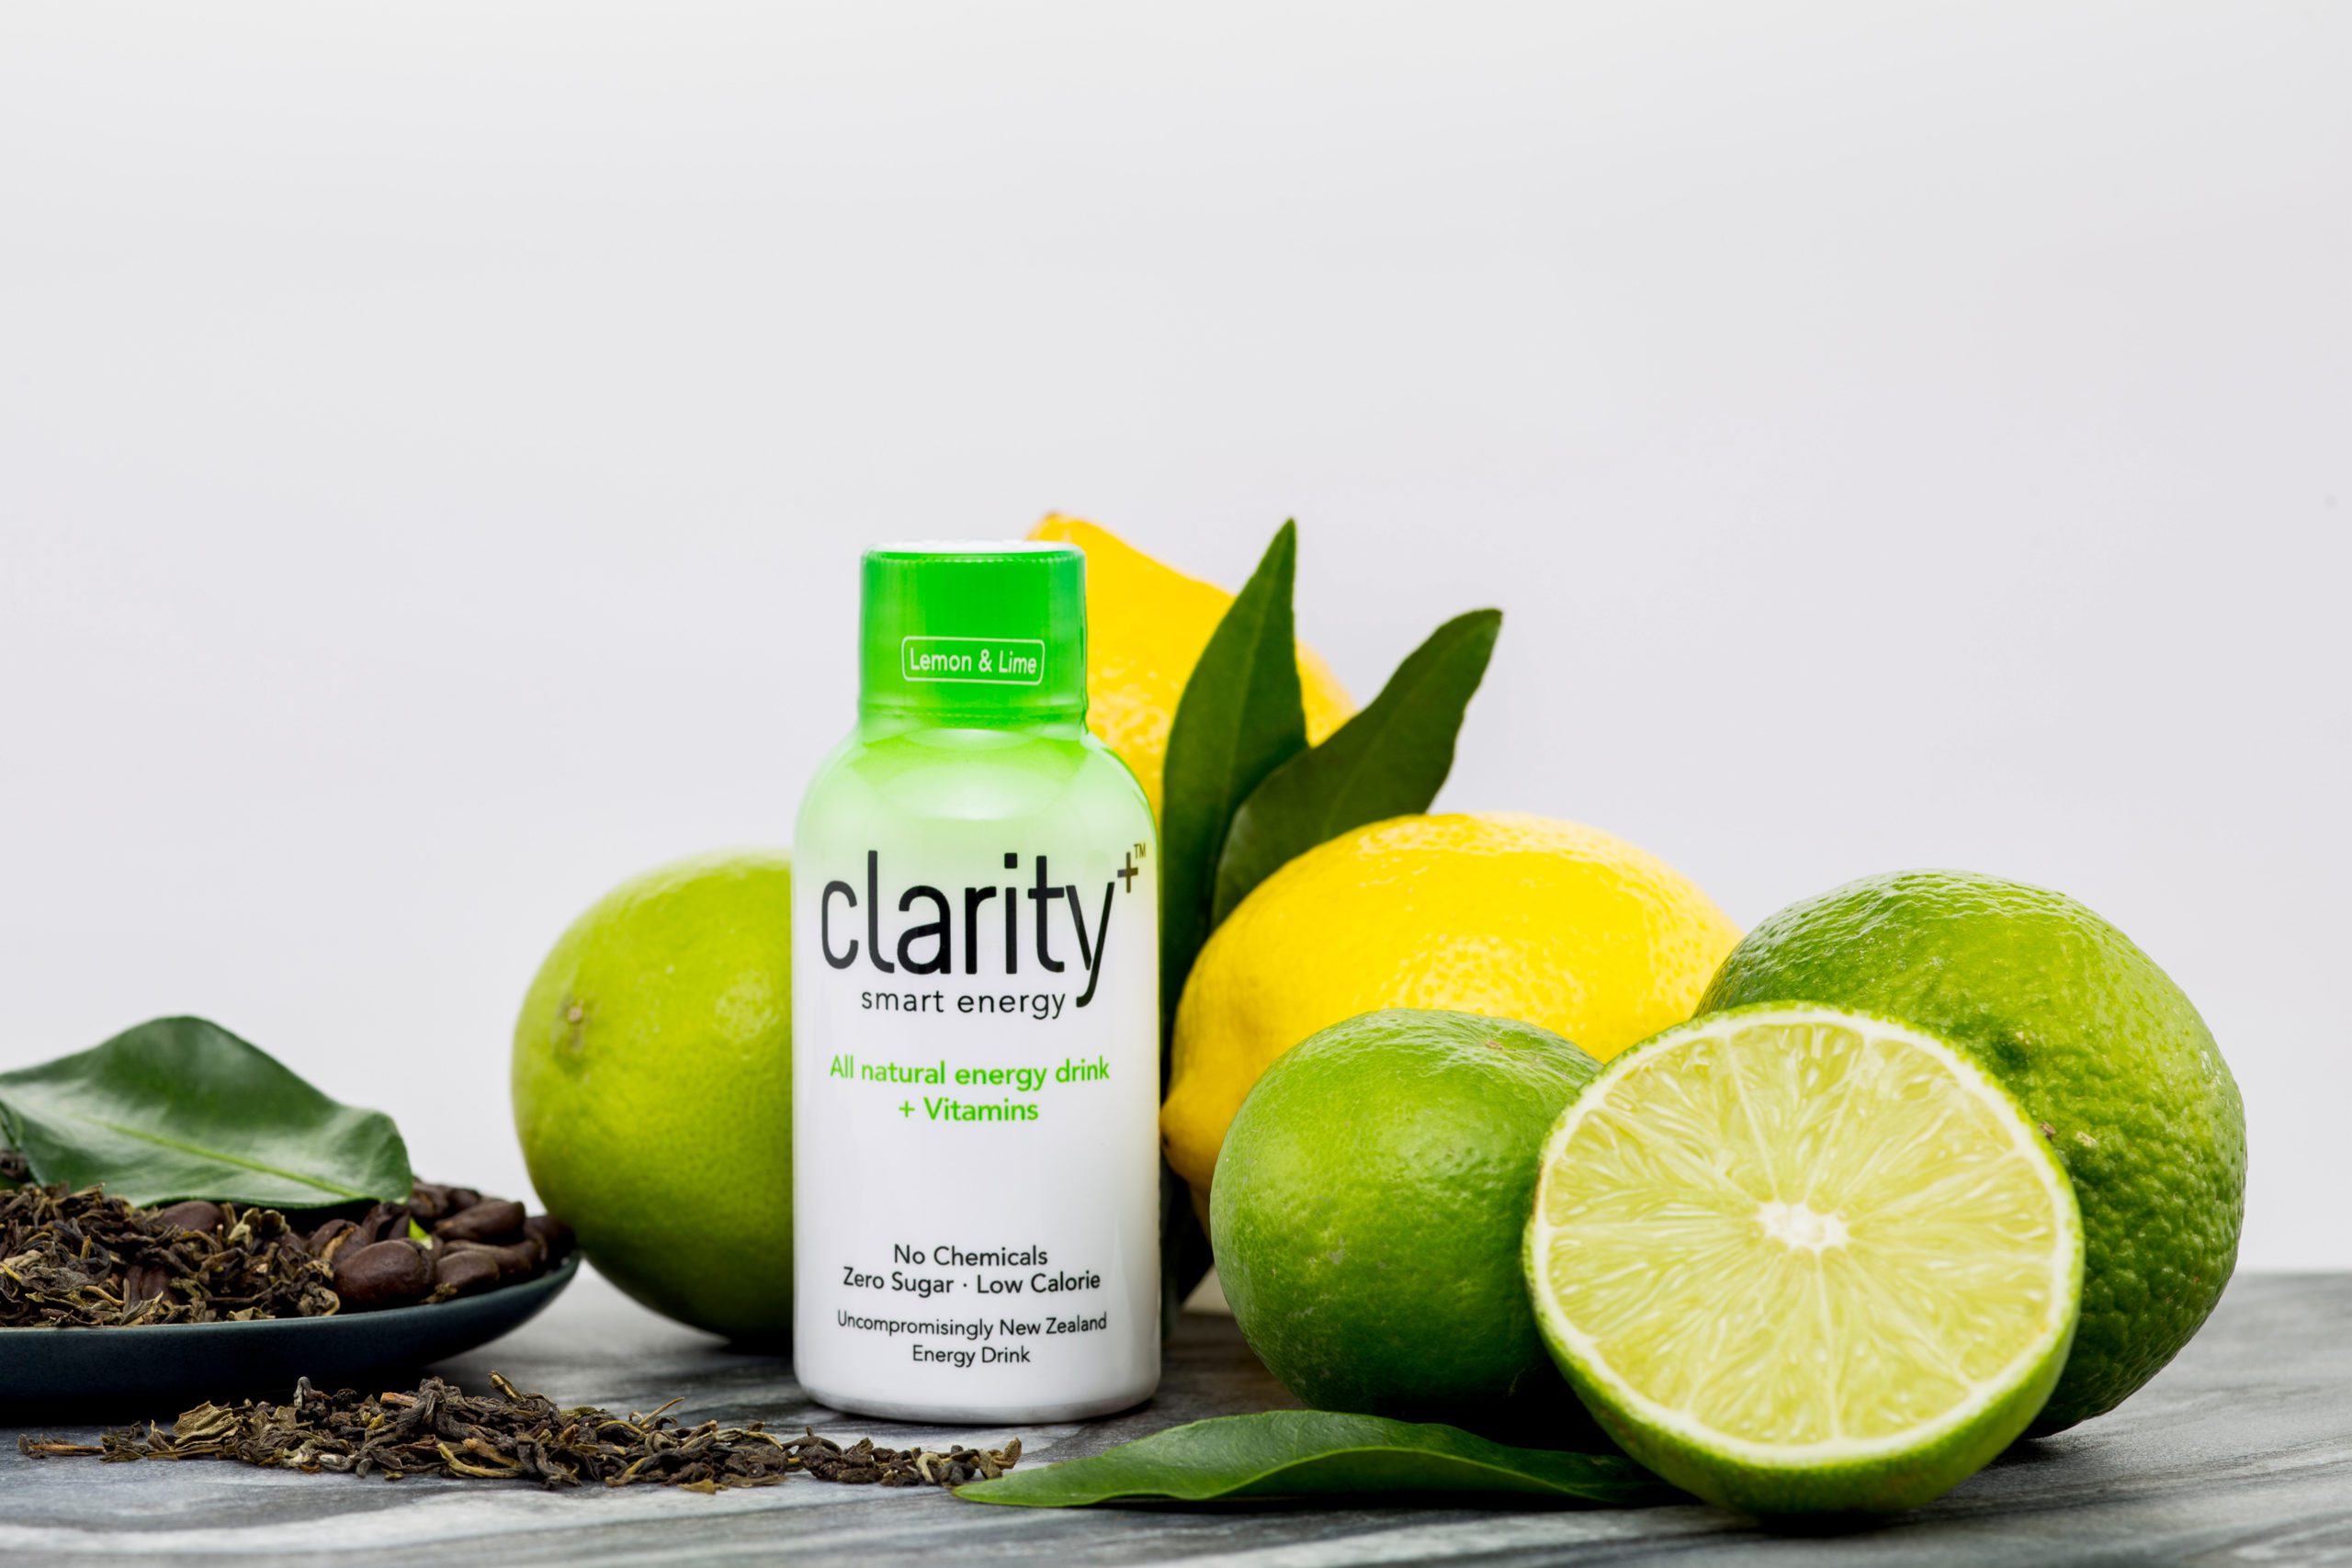 Clarity product photo with lime and lemon